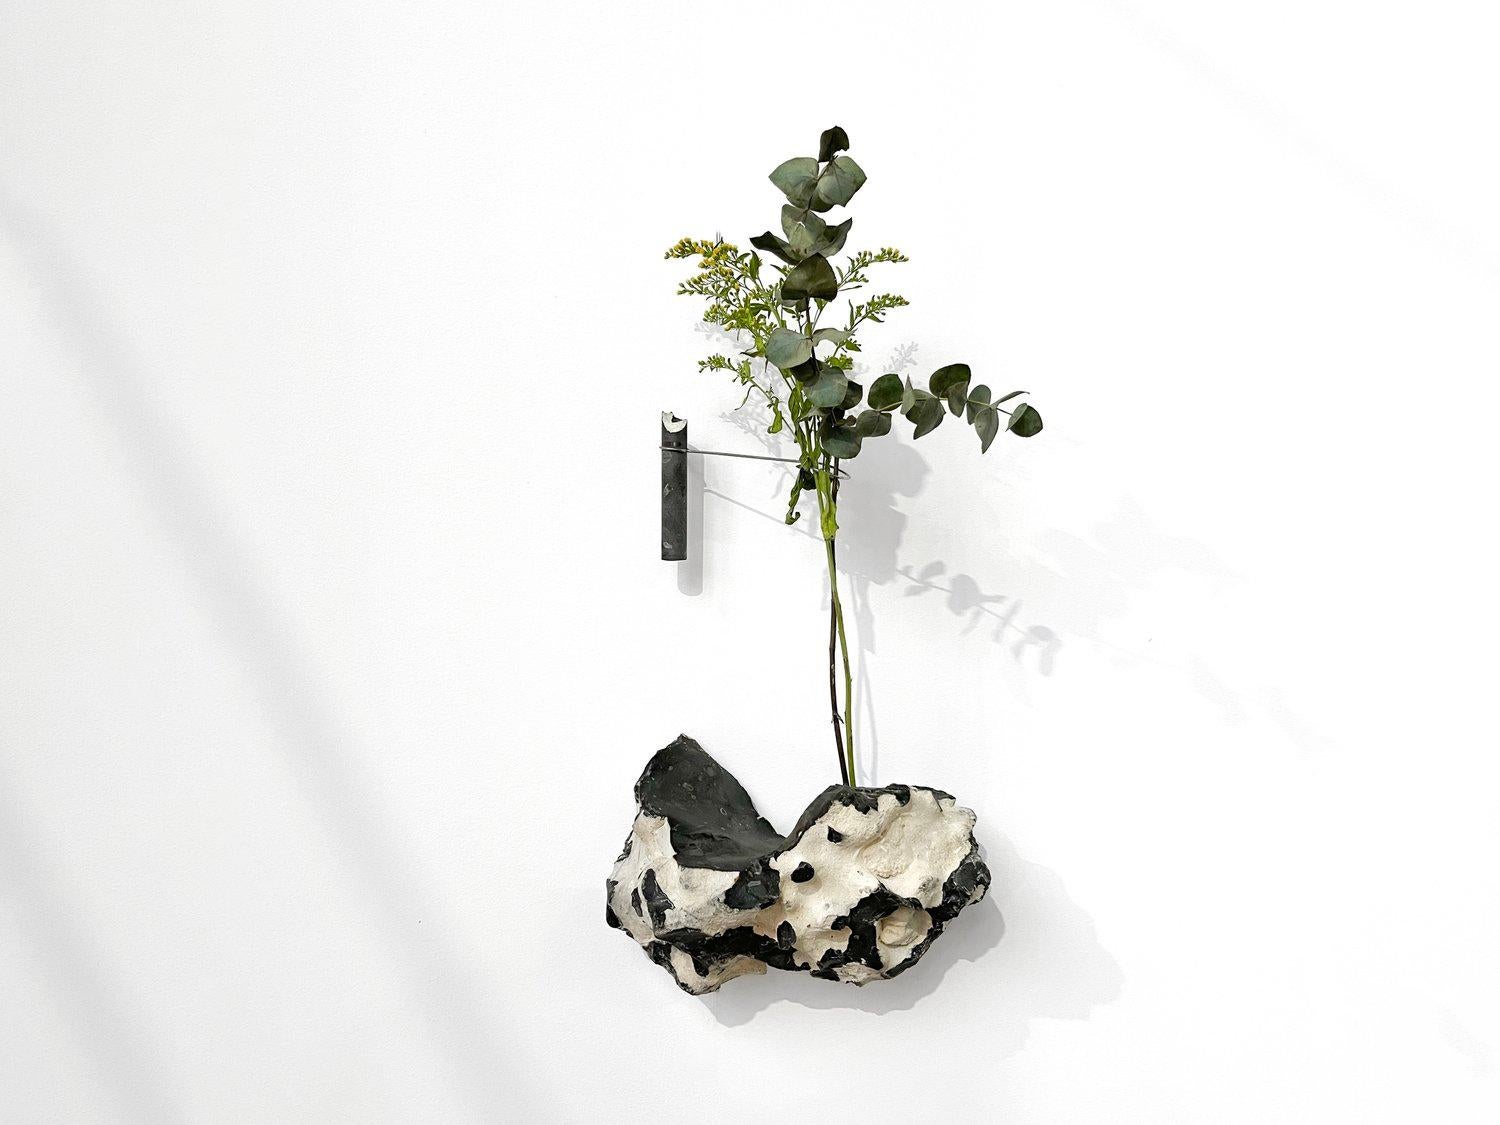 Silex Flintstone Flower Wall Vessel IV by Studio DO
Dimensions: D 26 x W 17.5 x H 17 cm
Materials: Silex stone, stainless steel.
7 kg.

Flowers are intrinsically connected with composition and earth.
Influenced by varied vessels from past to present